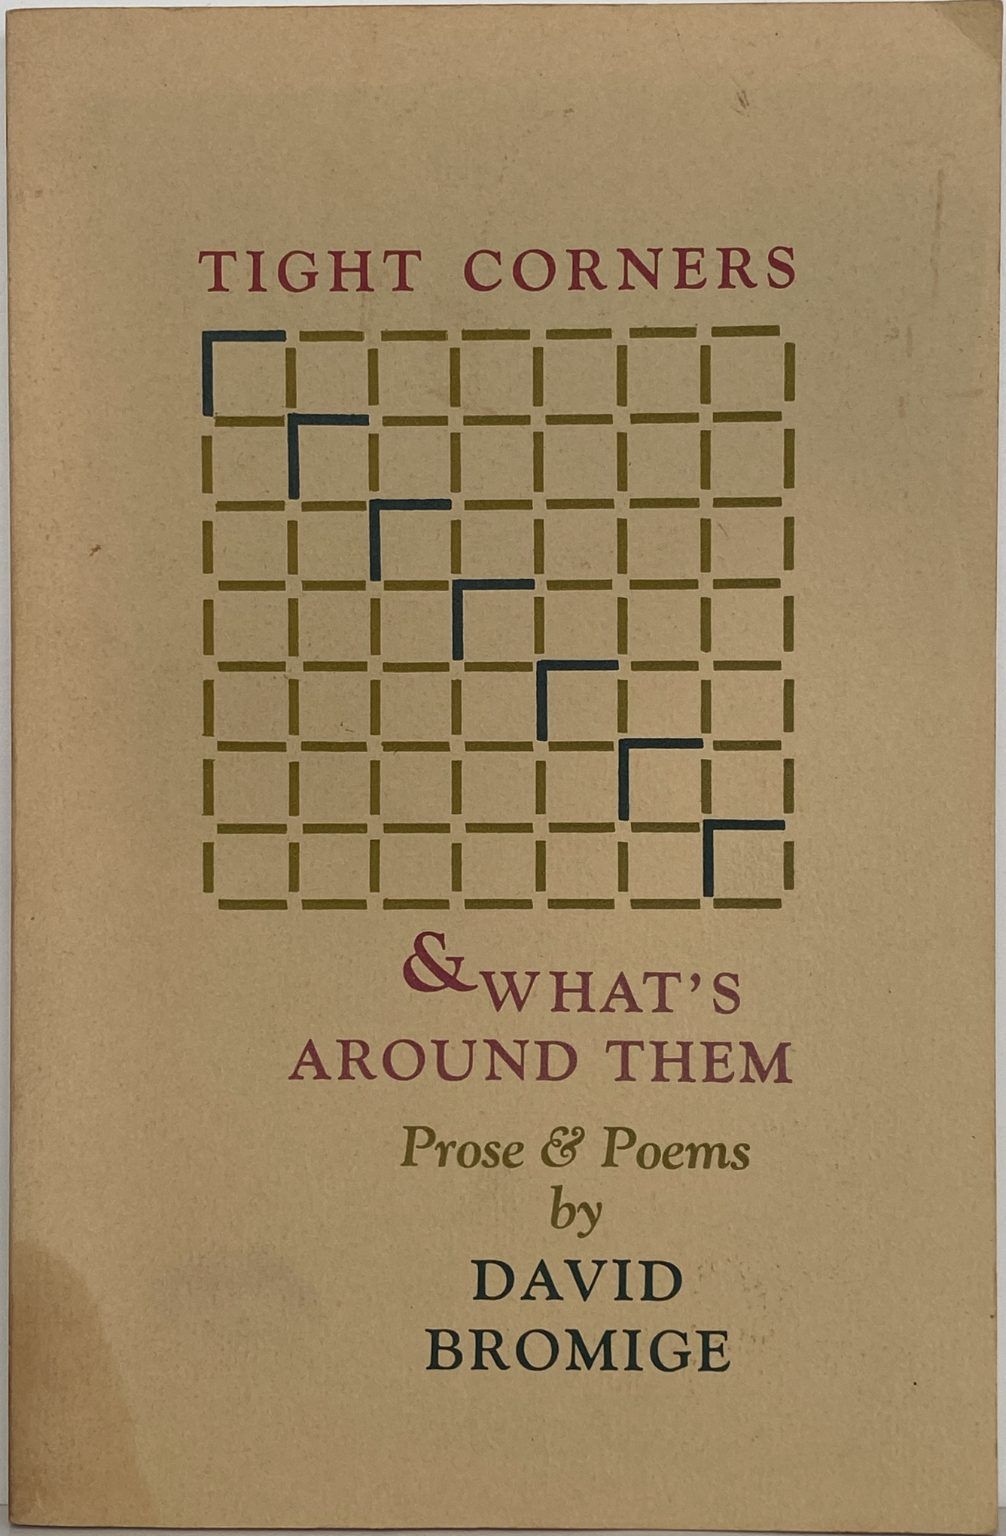 TIGHT CORNERS & WHAT'S AROUND THEM: Prose and Poems